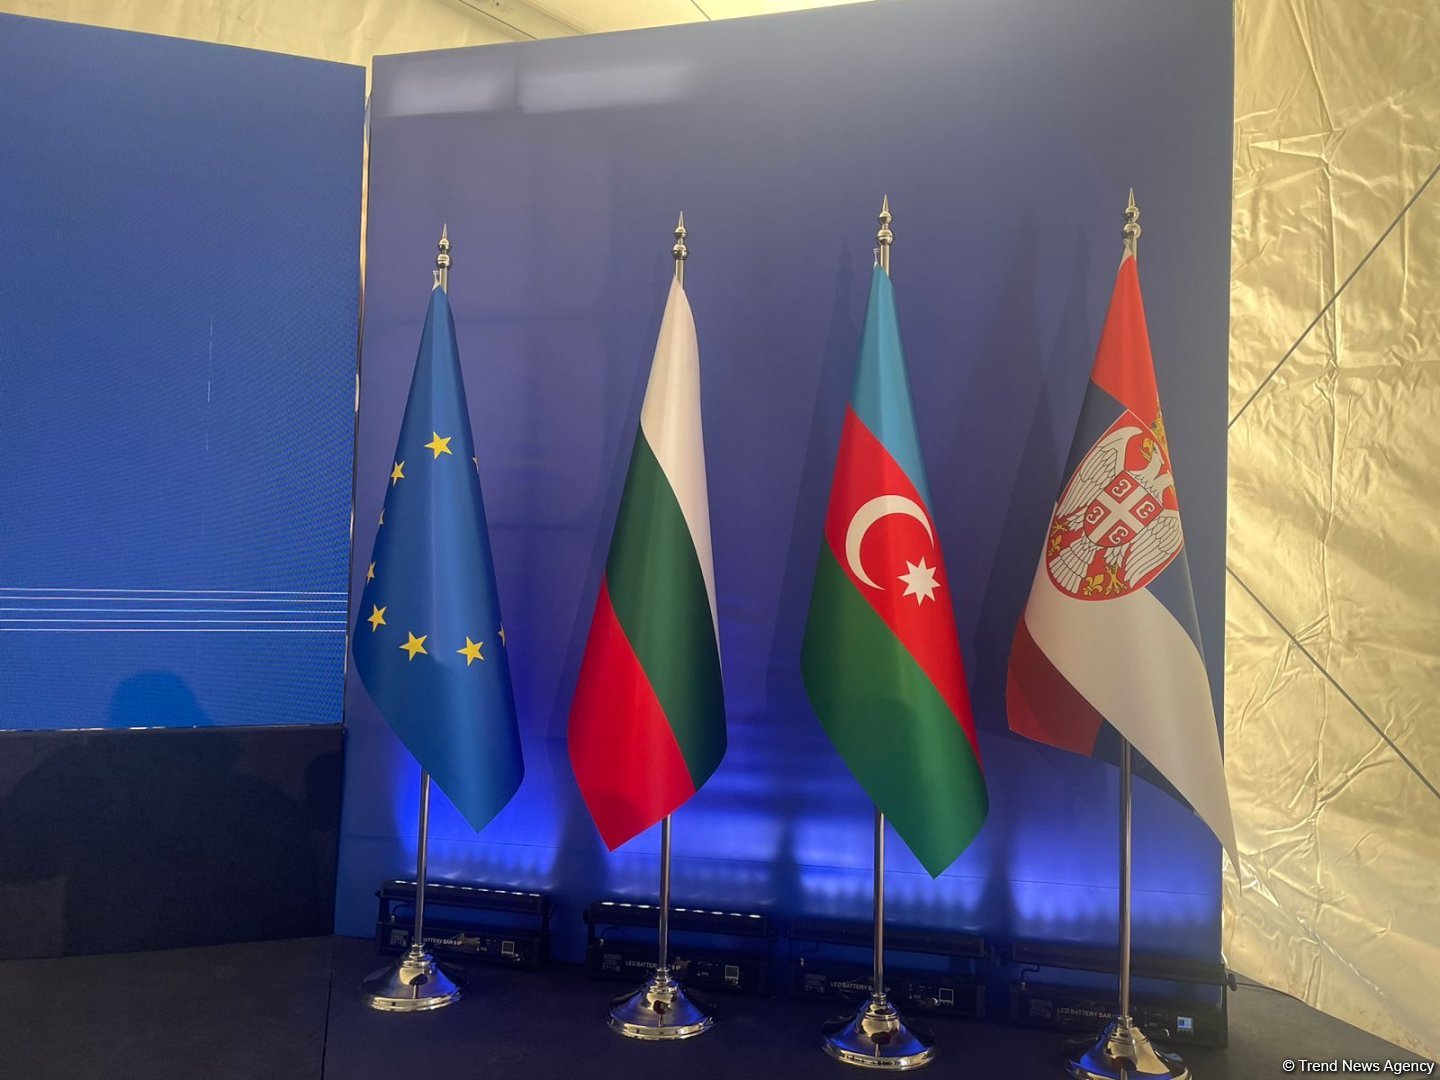 Serbia-Bulgaria Gas Interconnector launch ceremony takes place (PHOTO COVERAGE)